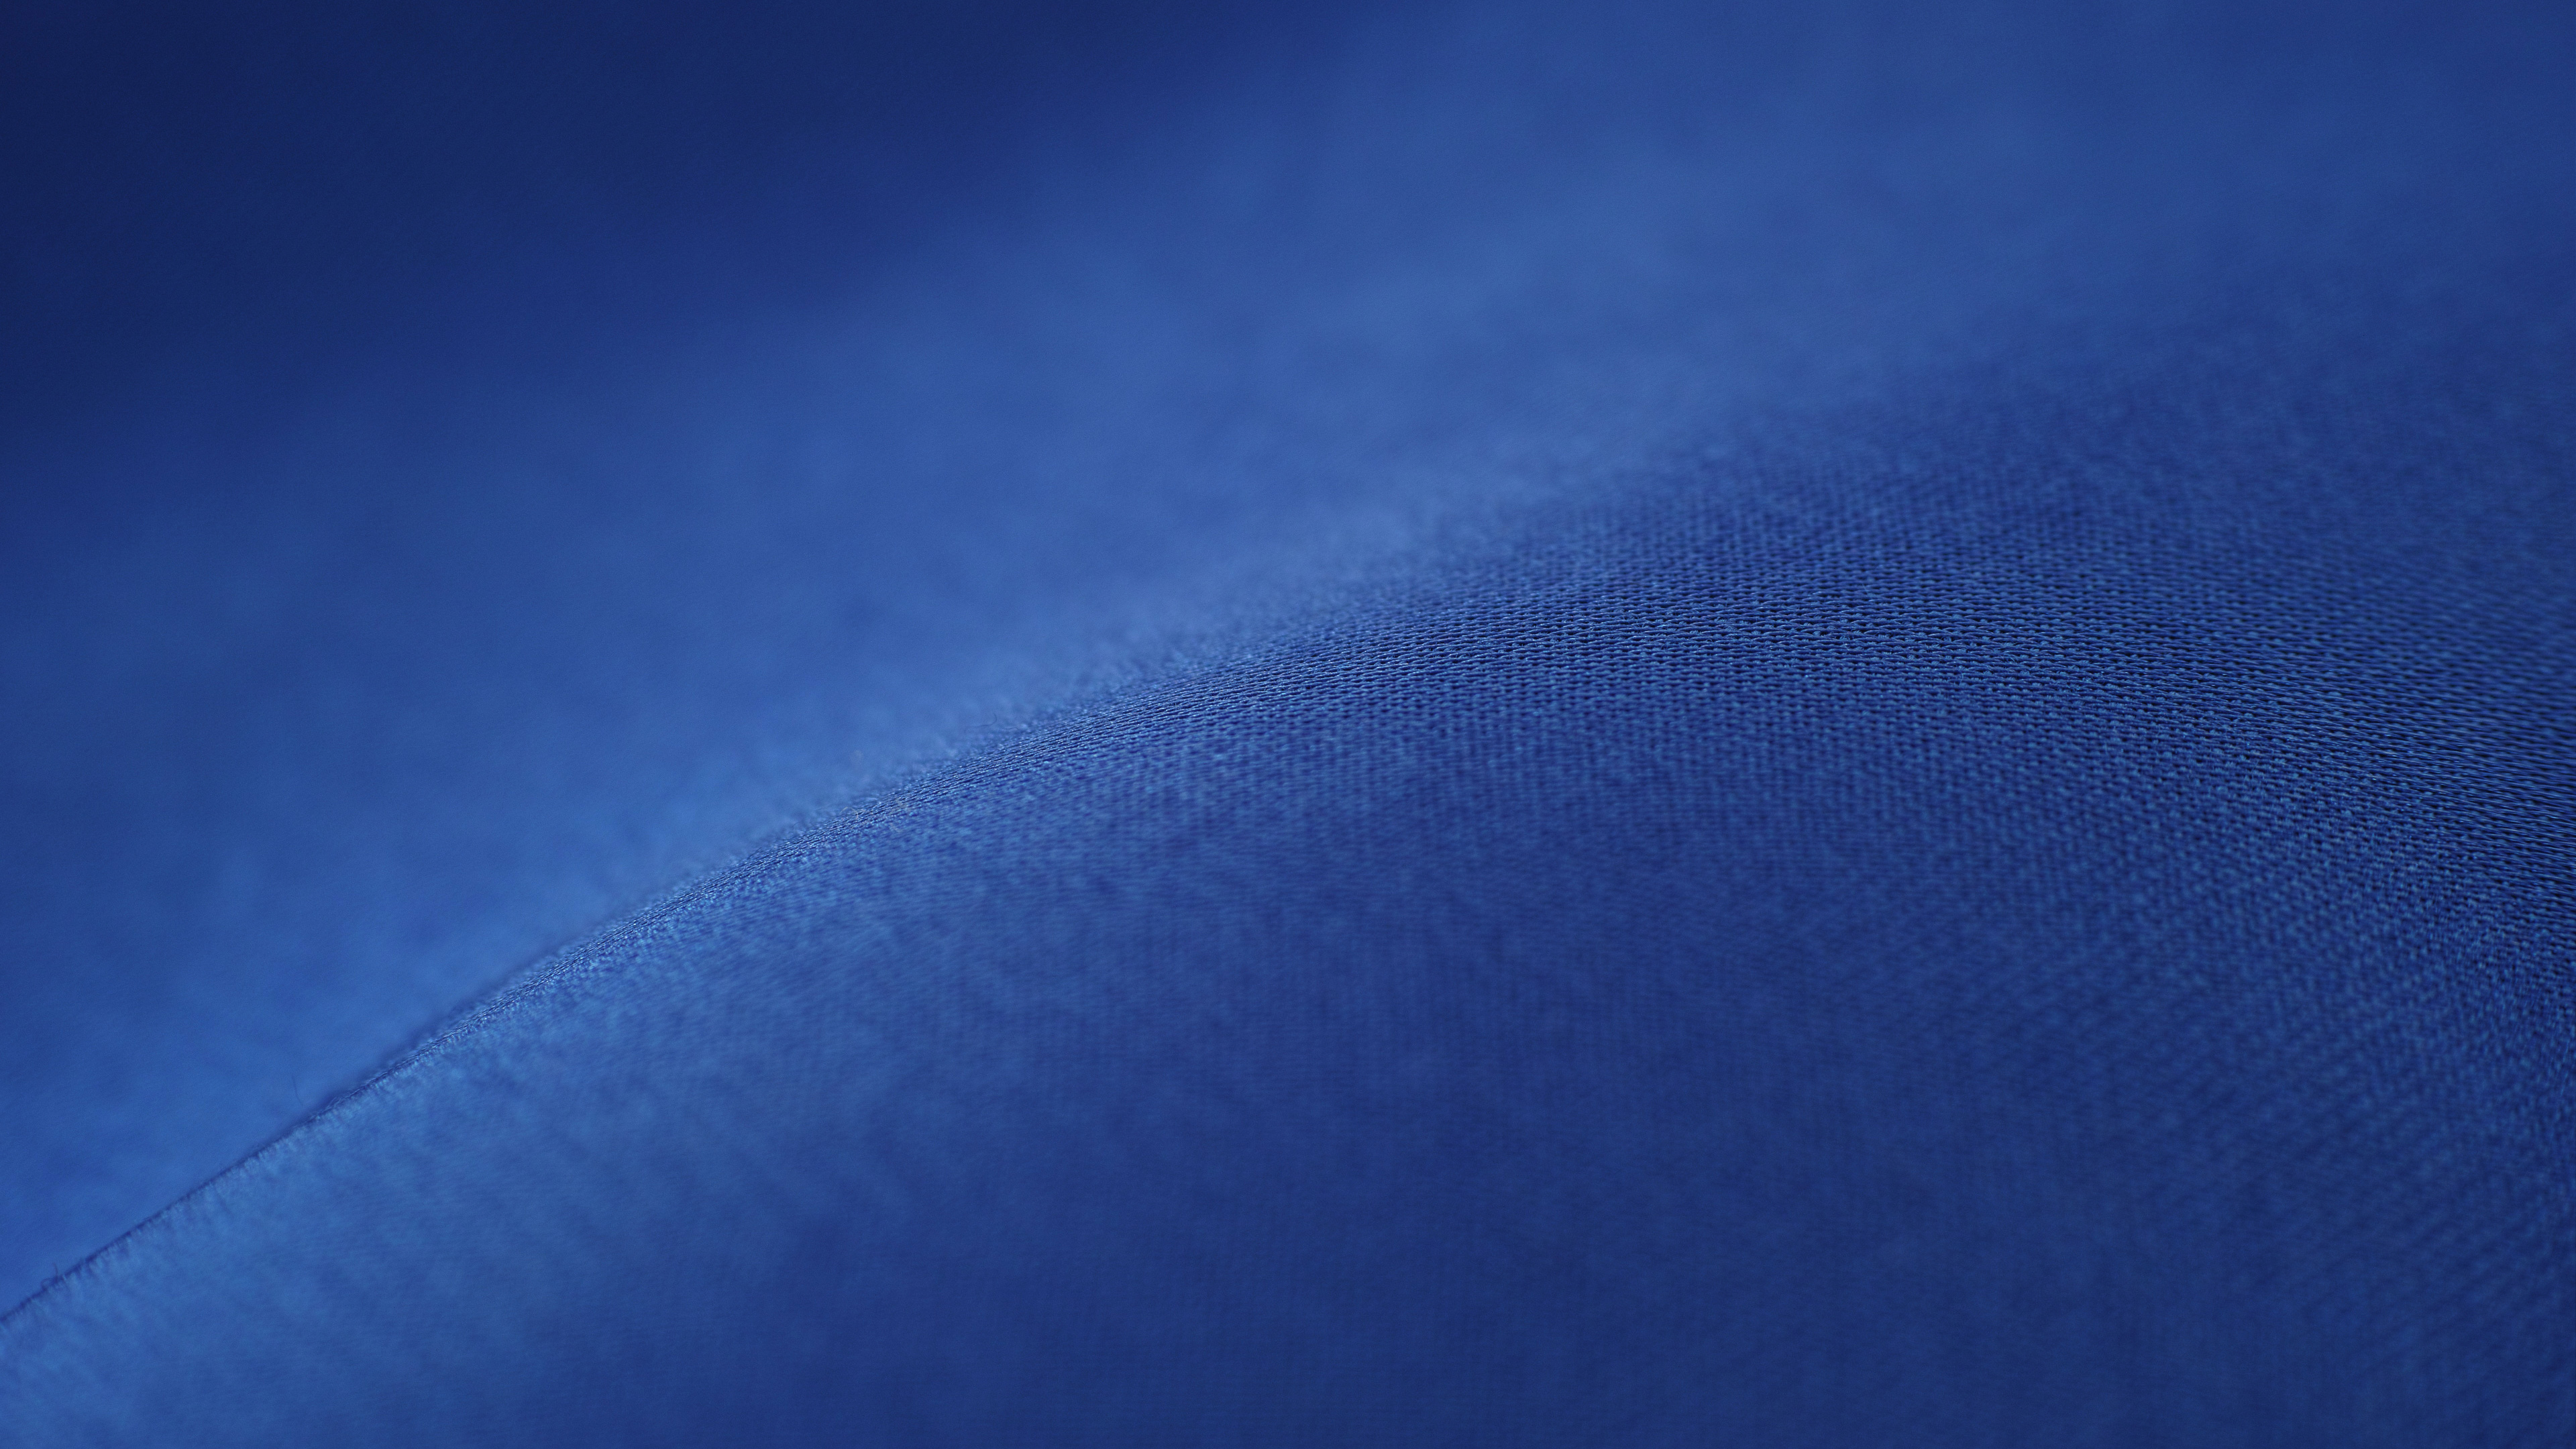 Blue Textile in Close up Photography. Wallpaper in 3840x2160 Resolution